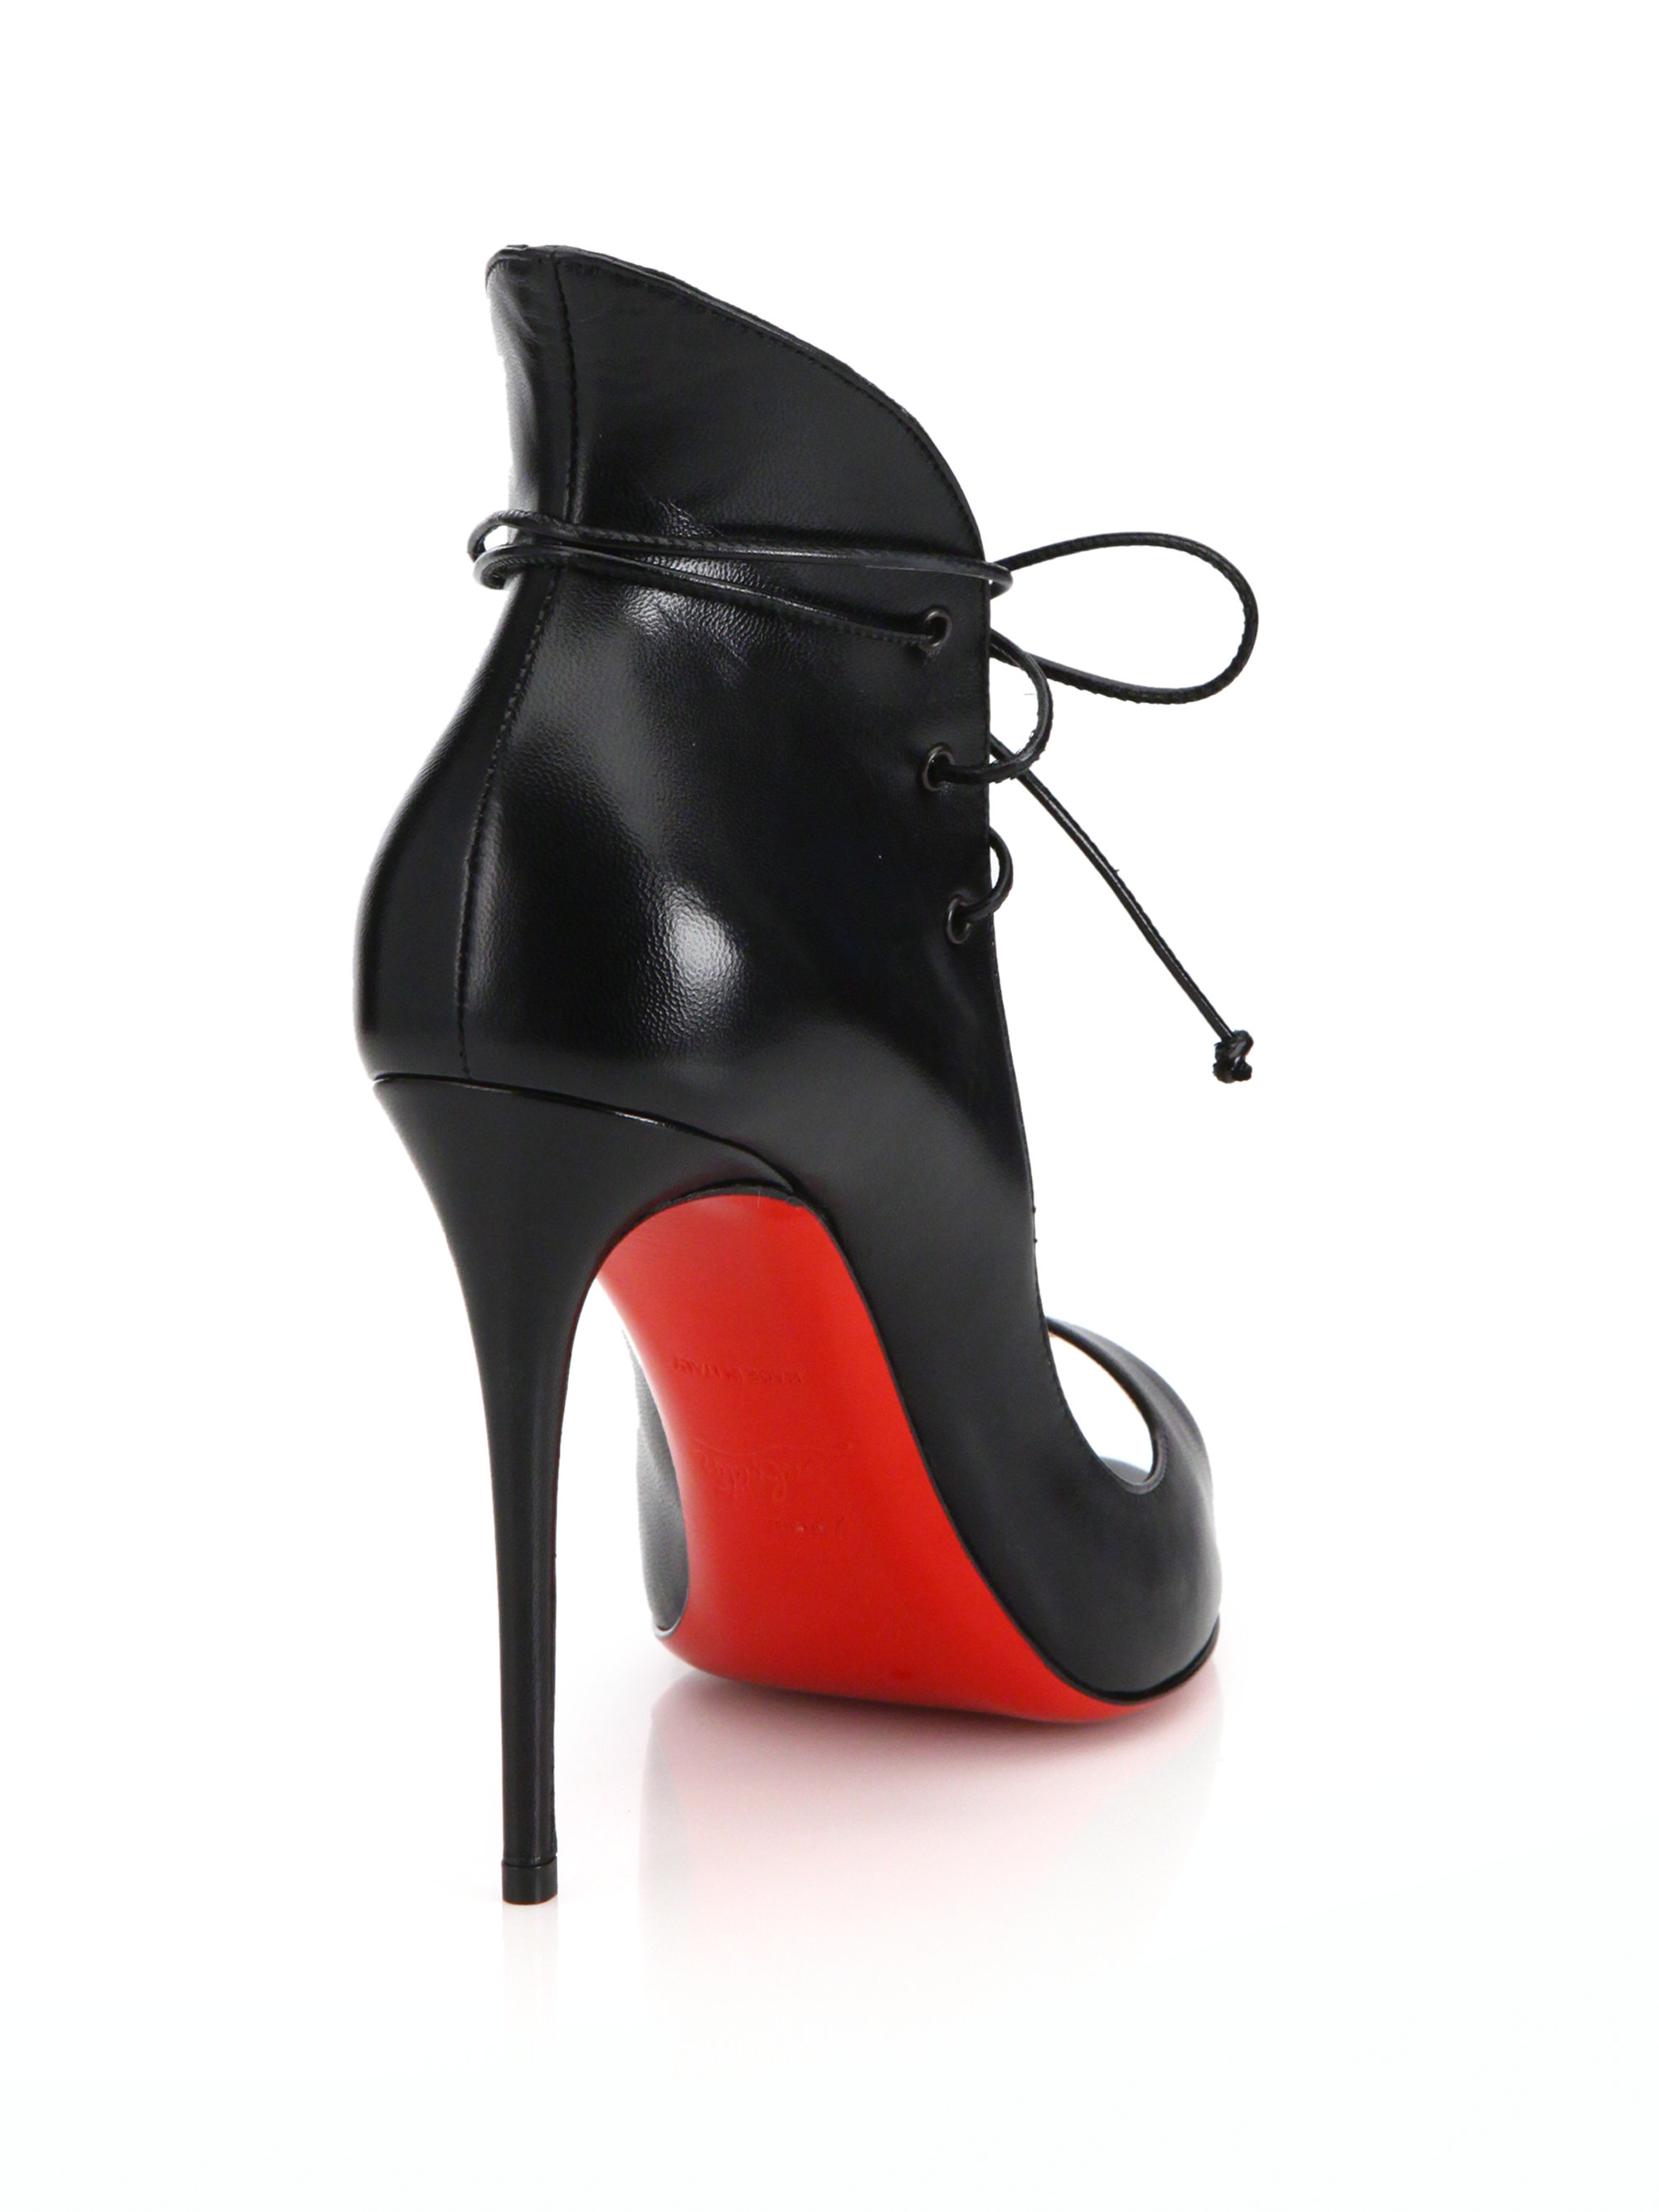 Christian louboutin Megavamp Lace-Up Leather Sandals in Black | Lyst